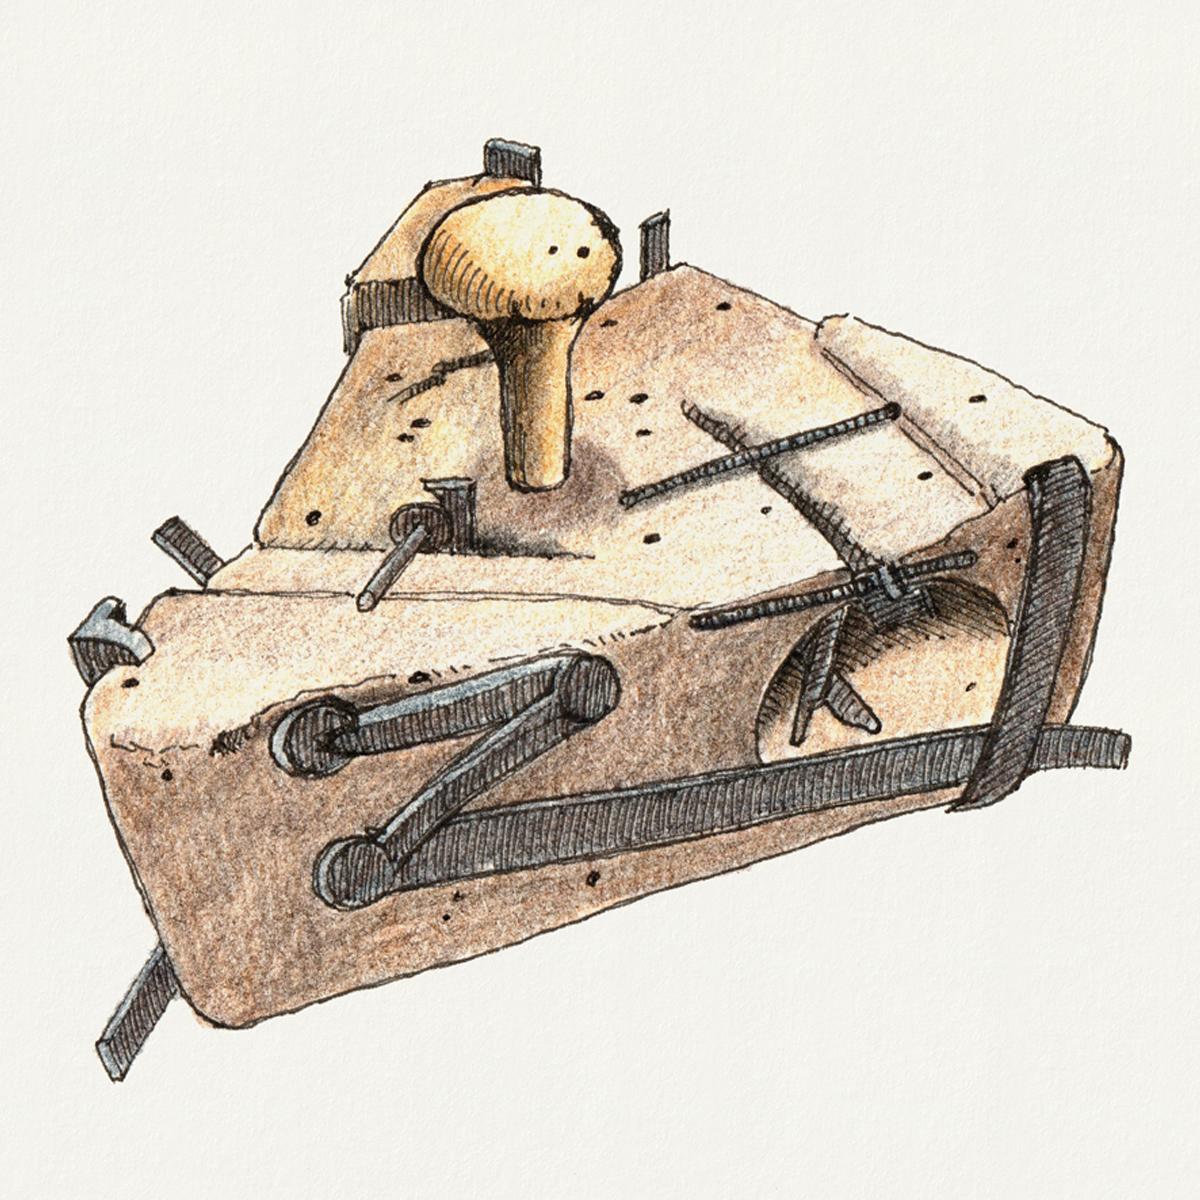 Limited edition print from pen & ink and coloured pencil drawing of an old mousetrap